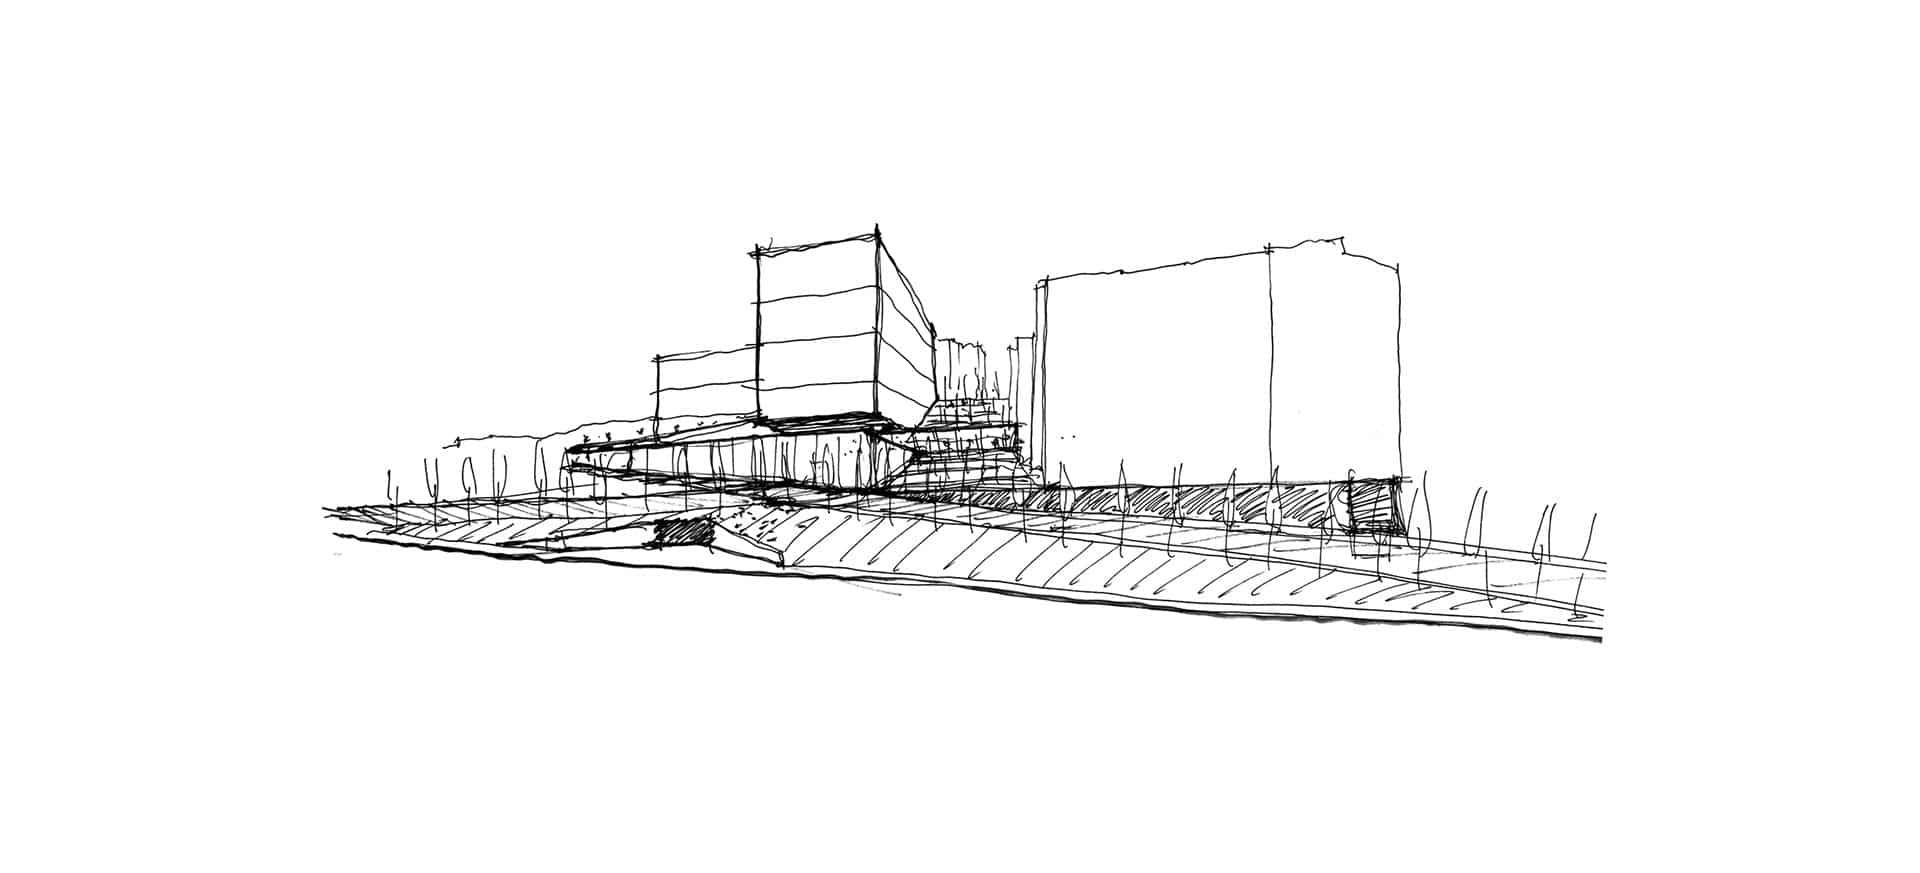 university of pikeville health professions building sketch by trivers architectural firm